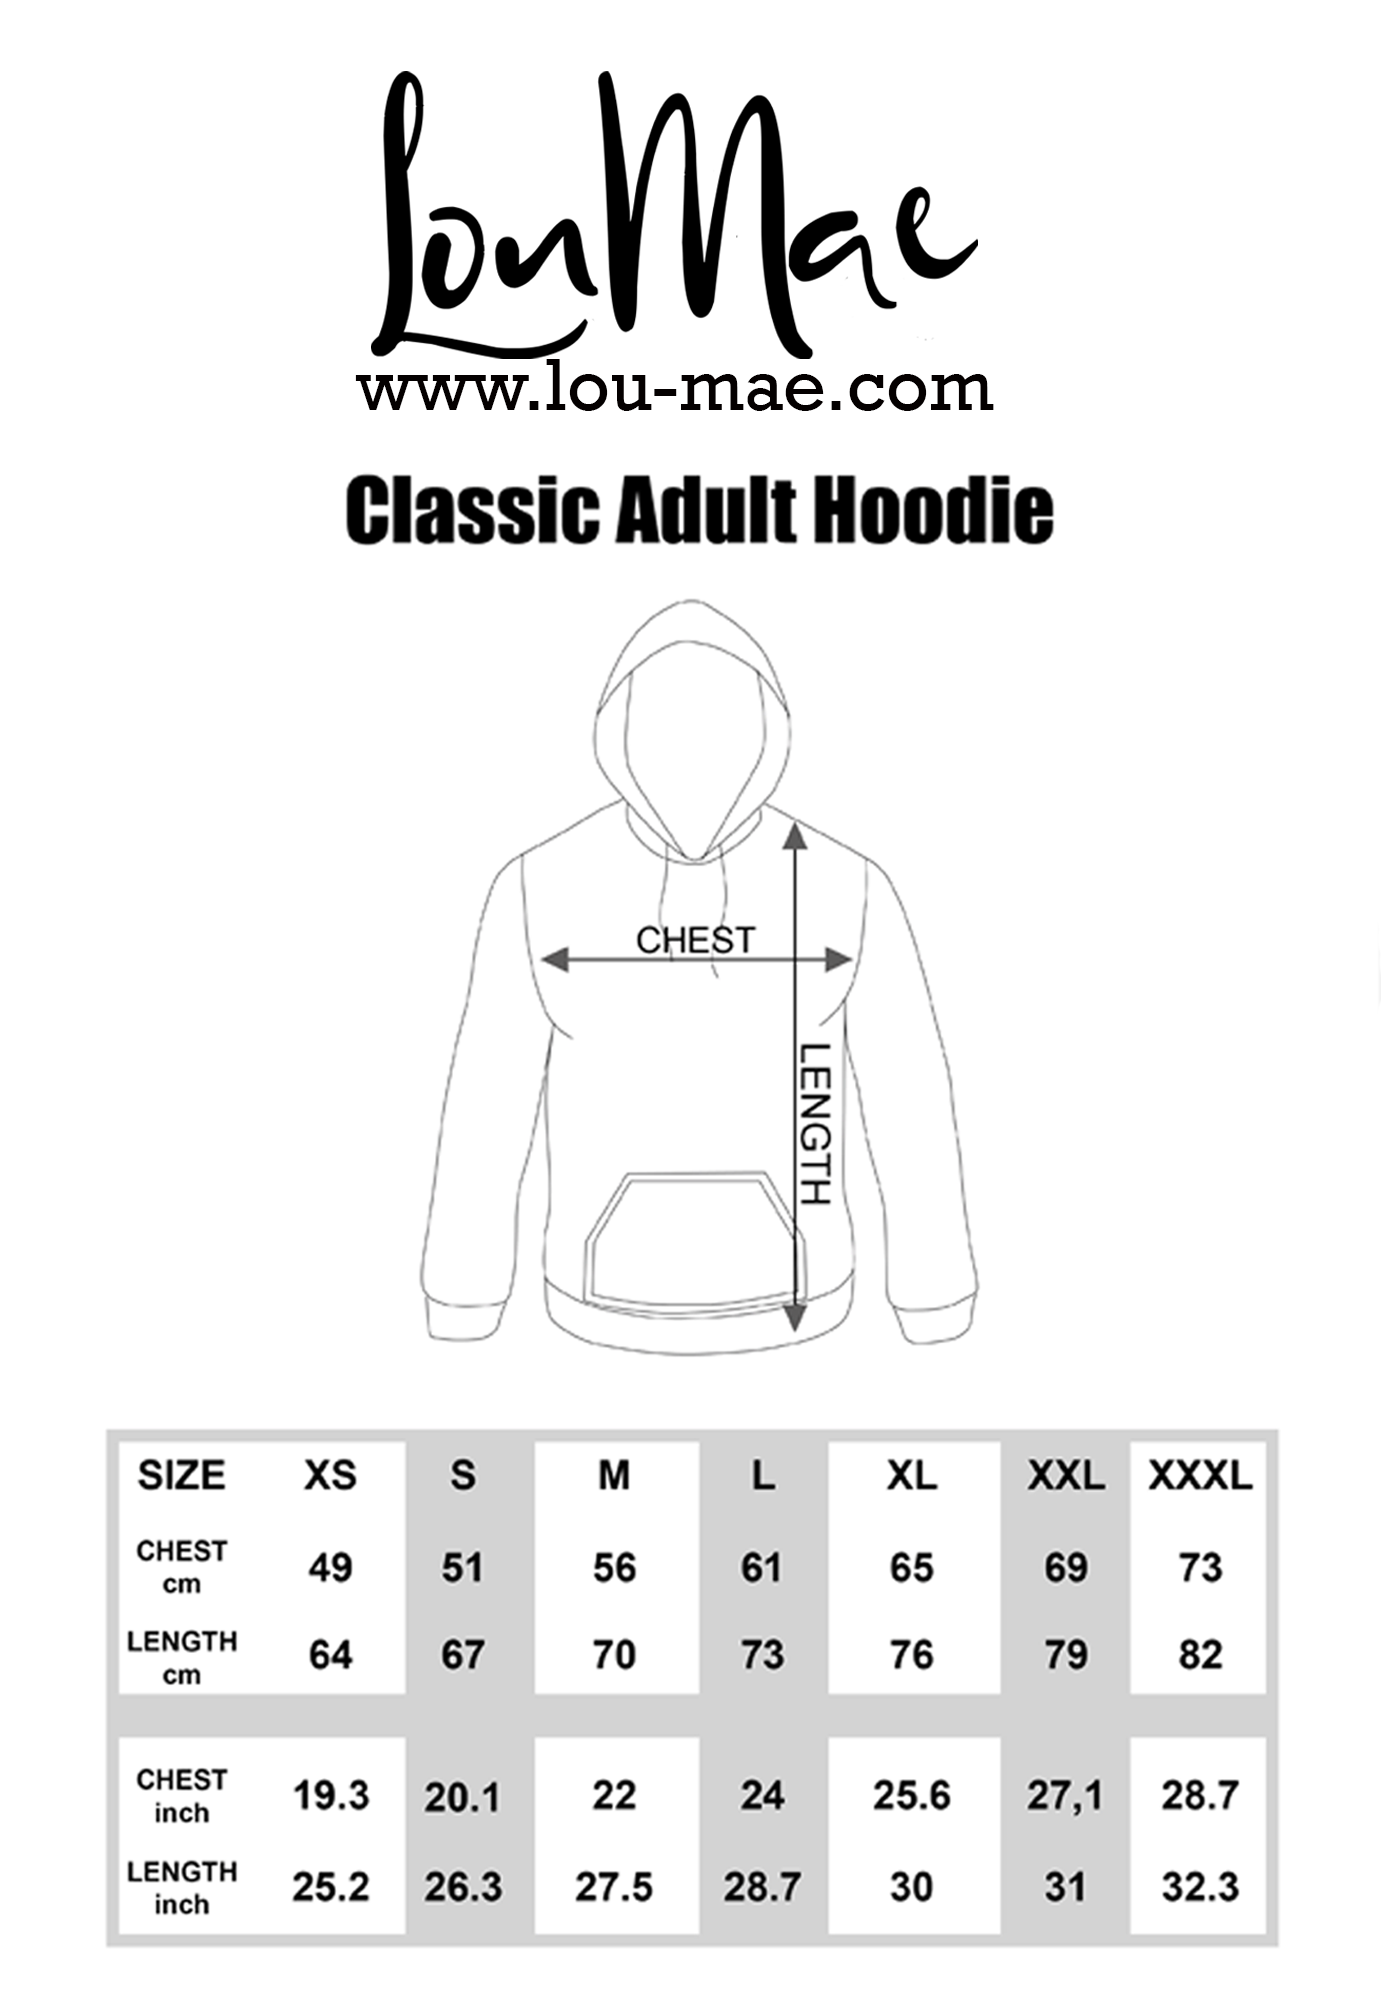 Hoodie | Fortify | Imperial Fists | 40K